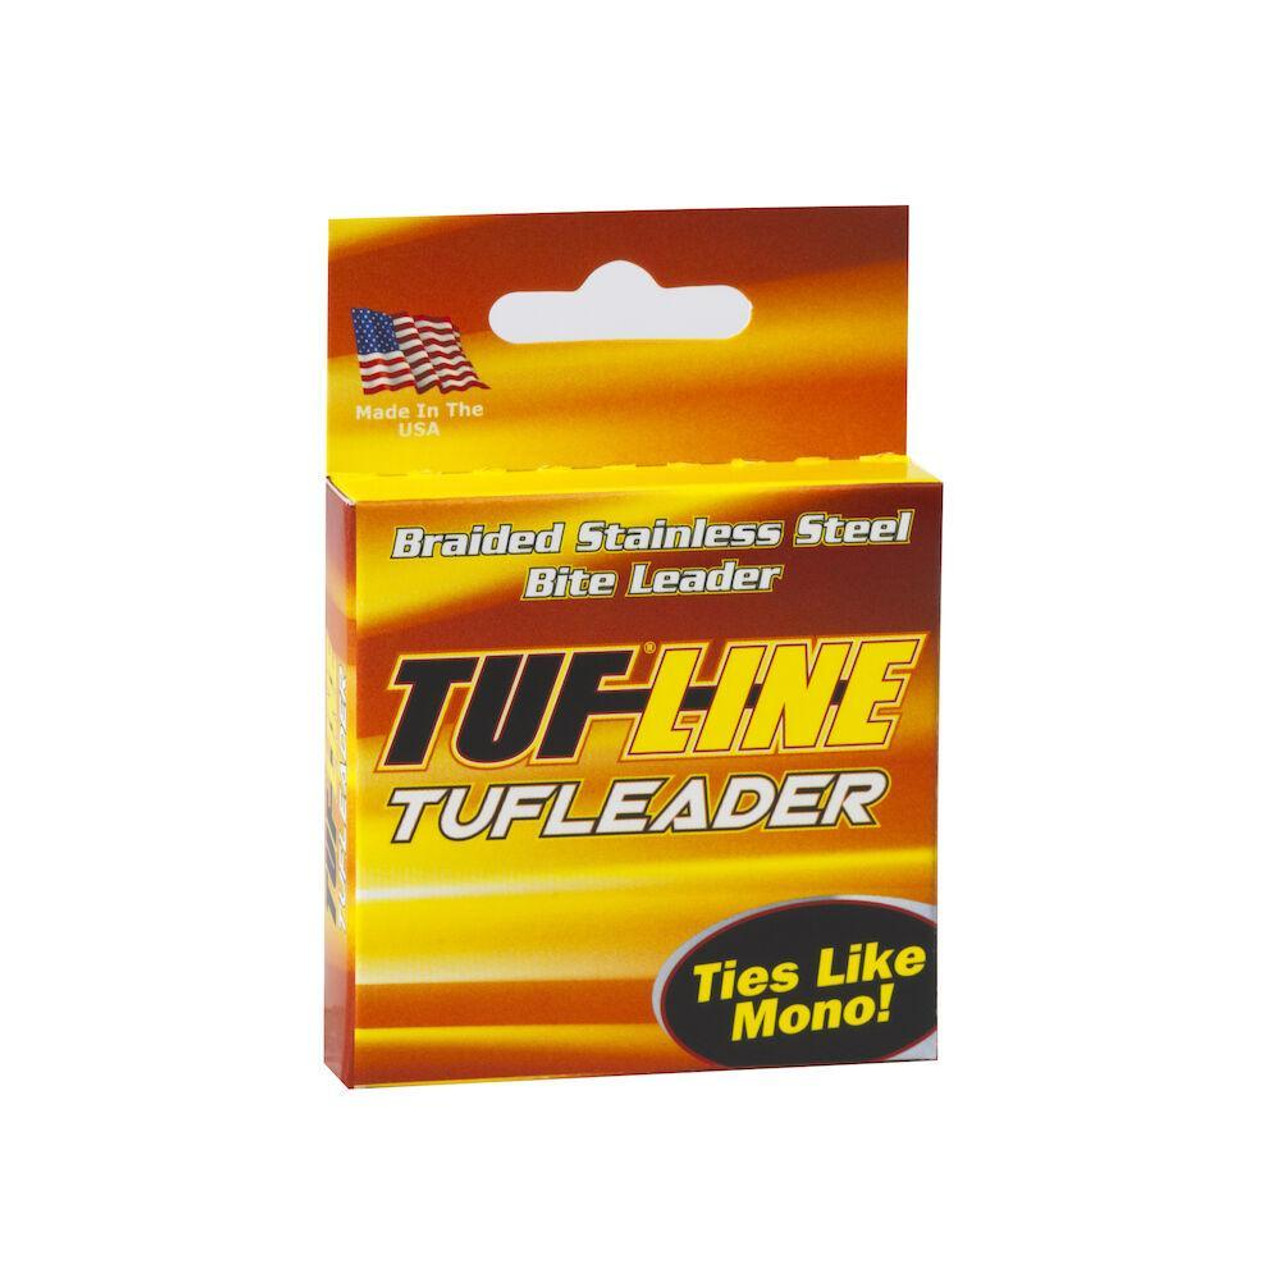 Tuf-Line Tuf-Leader - Braided Stainless Steel Leader with Spectra